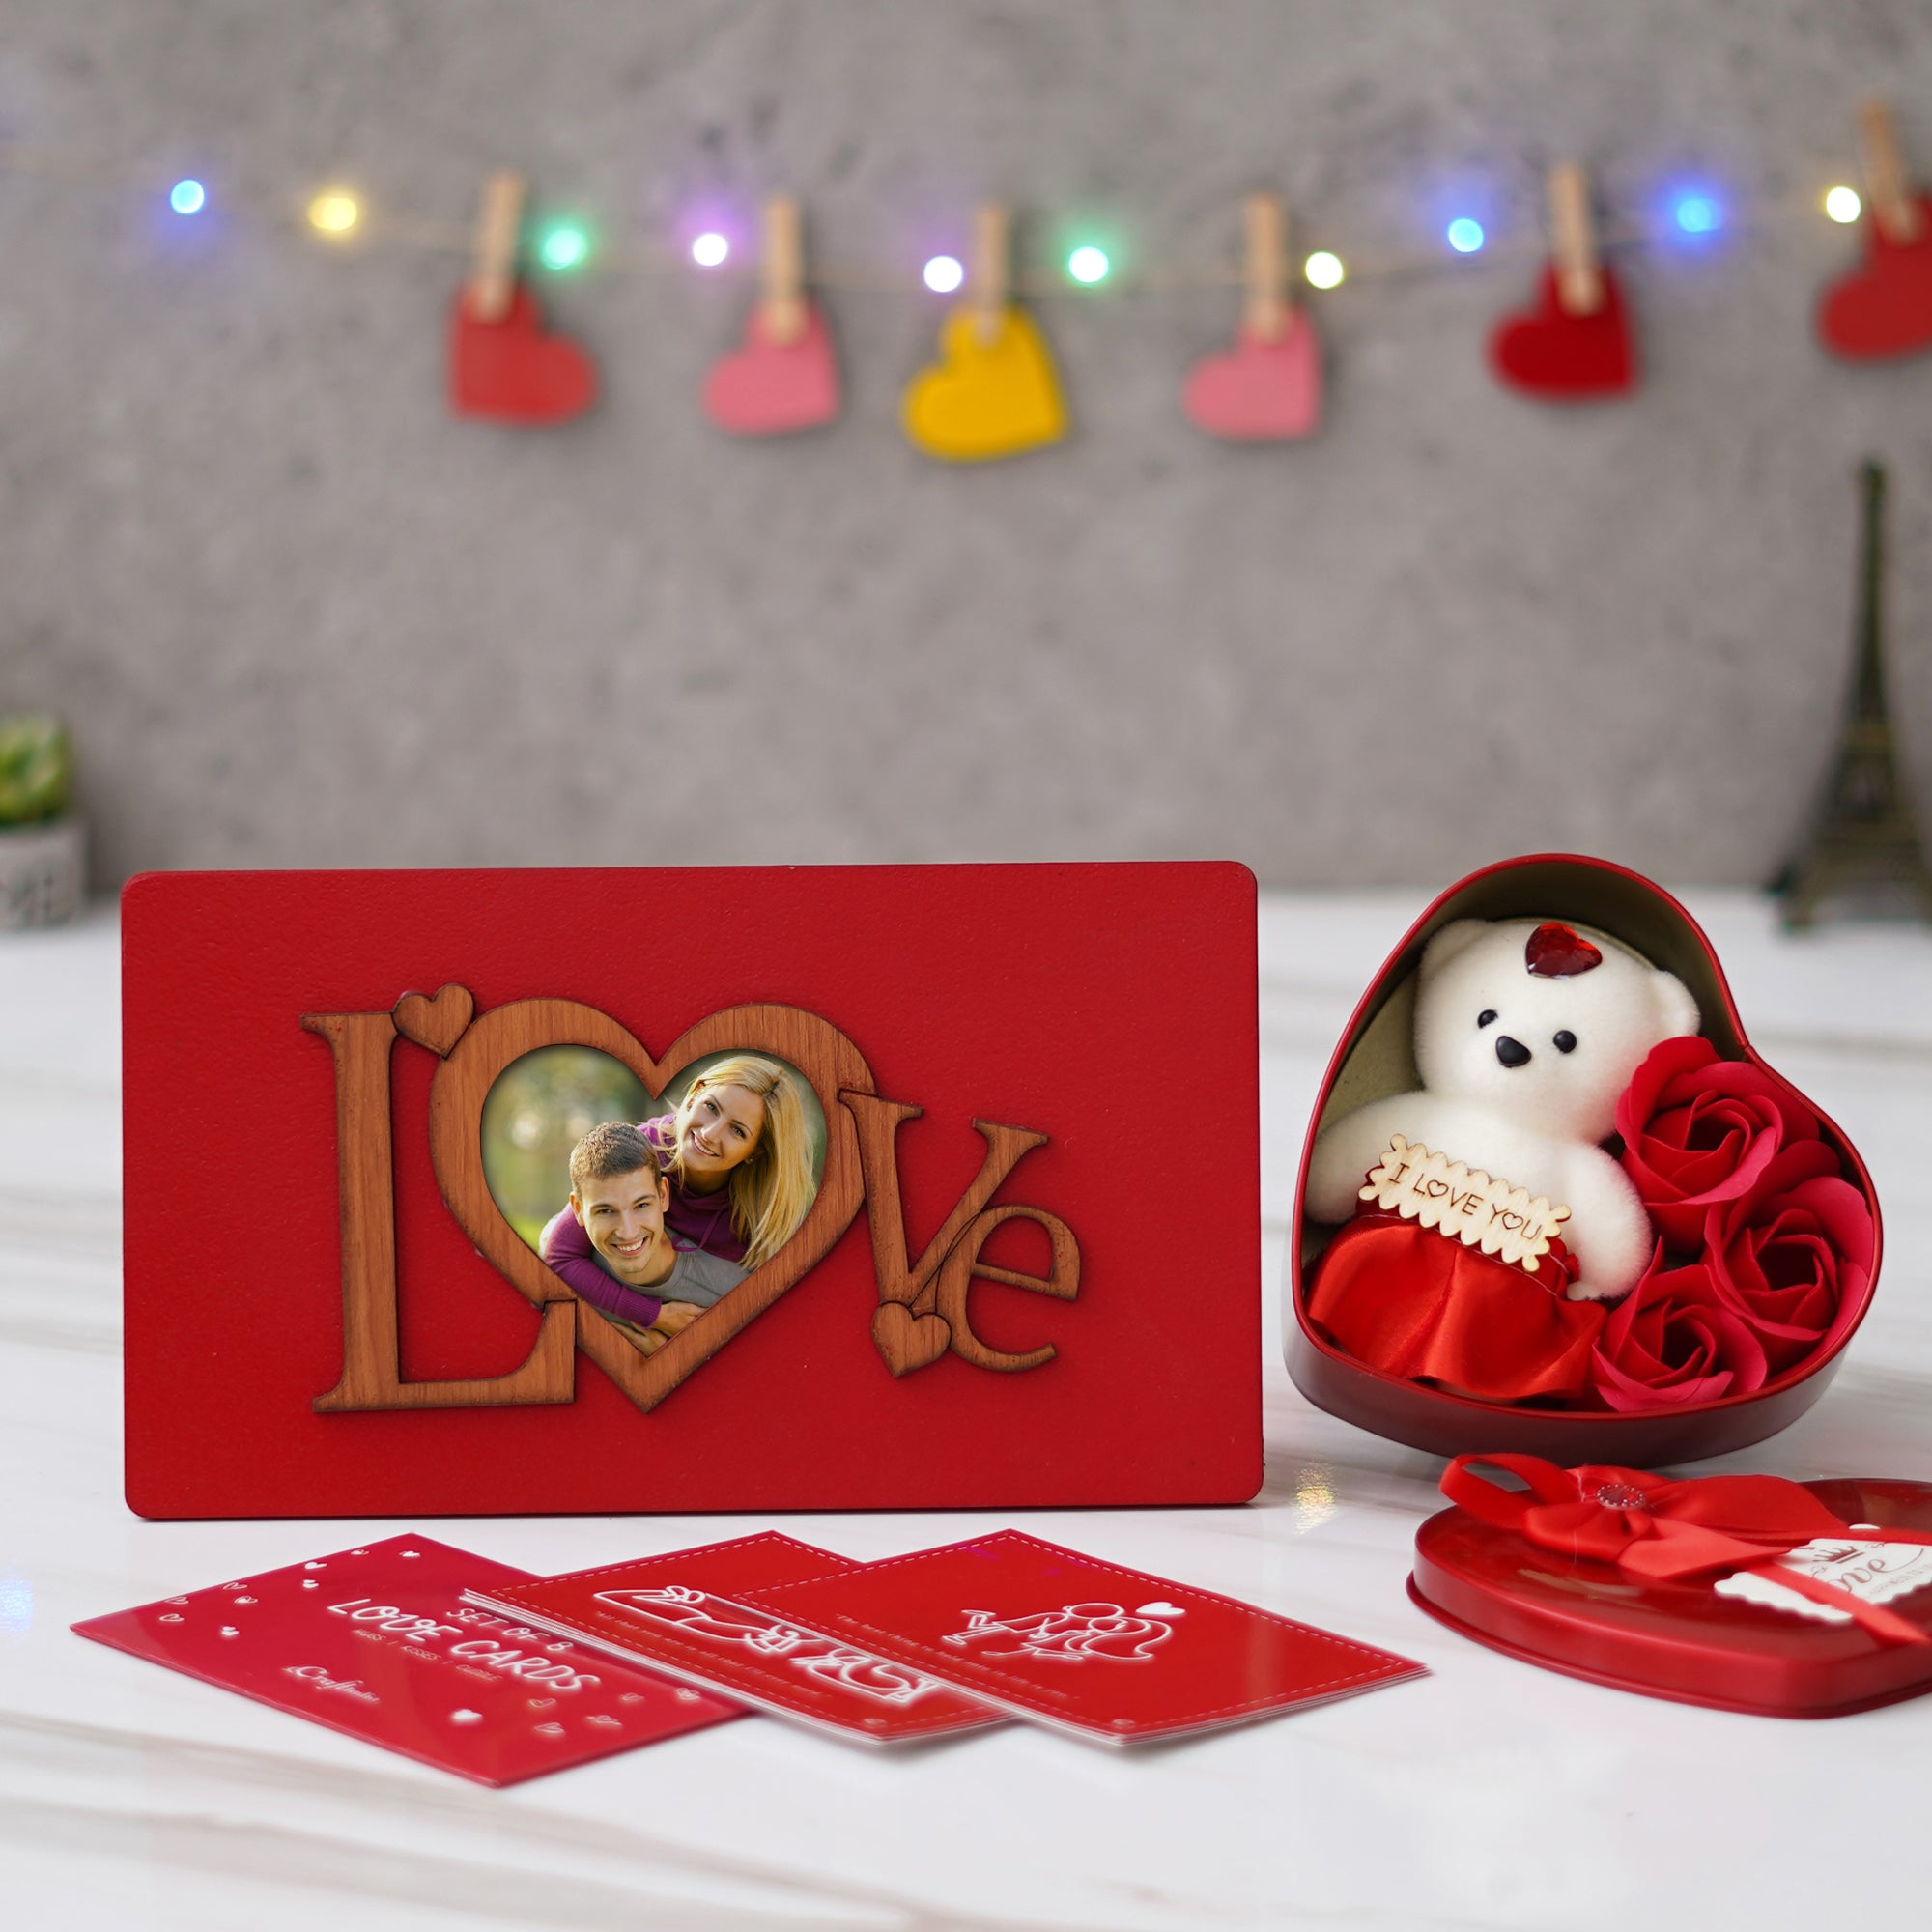 Valentine Combo of Pack of 8 Love Gift Cards, "Love" Wooden Photo Frame With Red Stand, Heart Shaped Gift Box Set with White Teddy and Red Roses